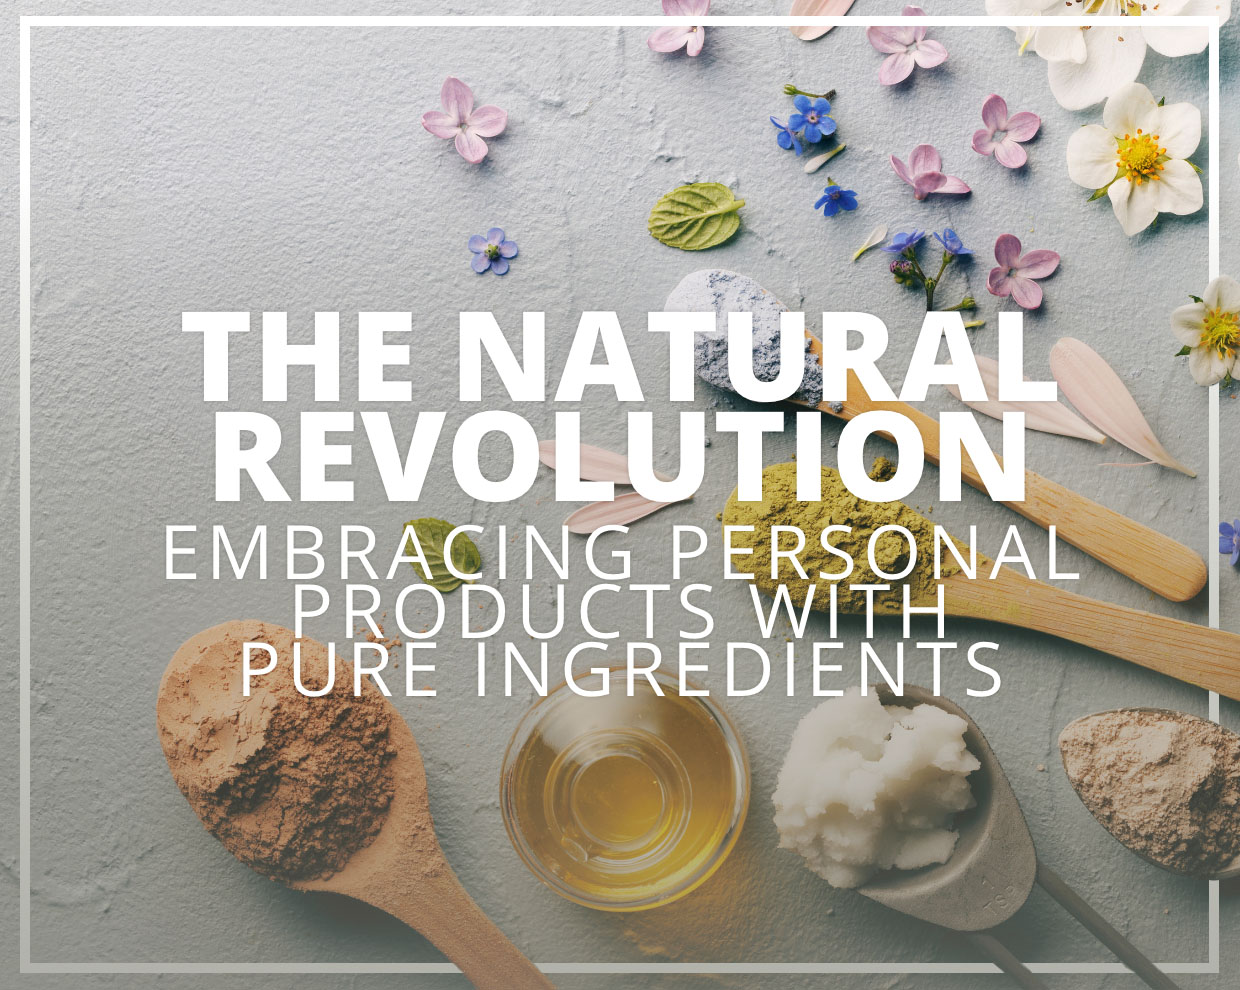 The Natural Revolution: Embracing Personal Products with Pure Ingredients